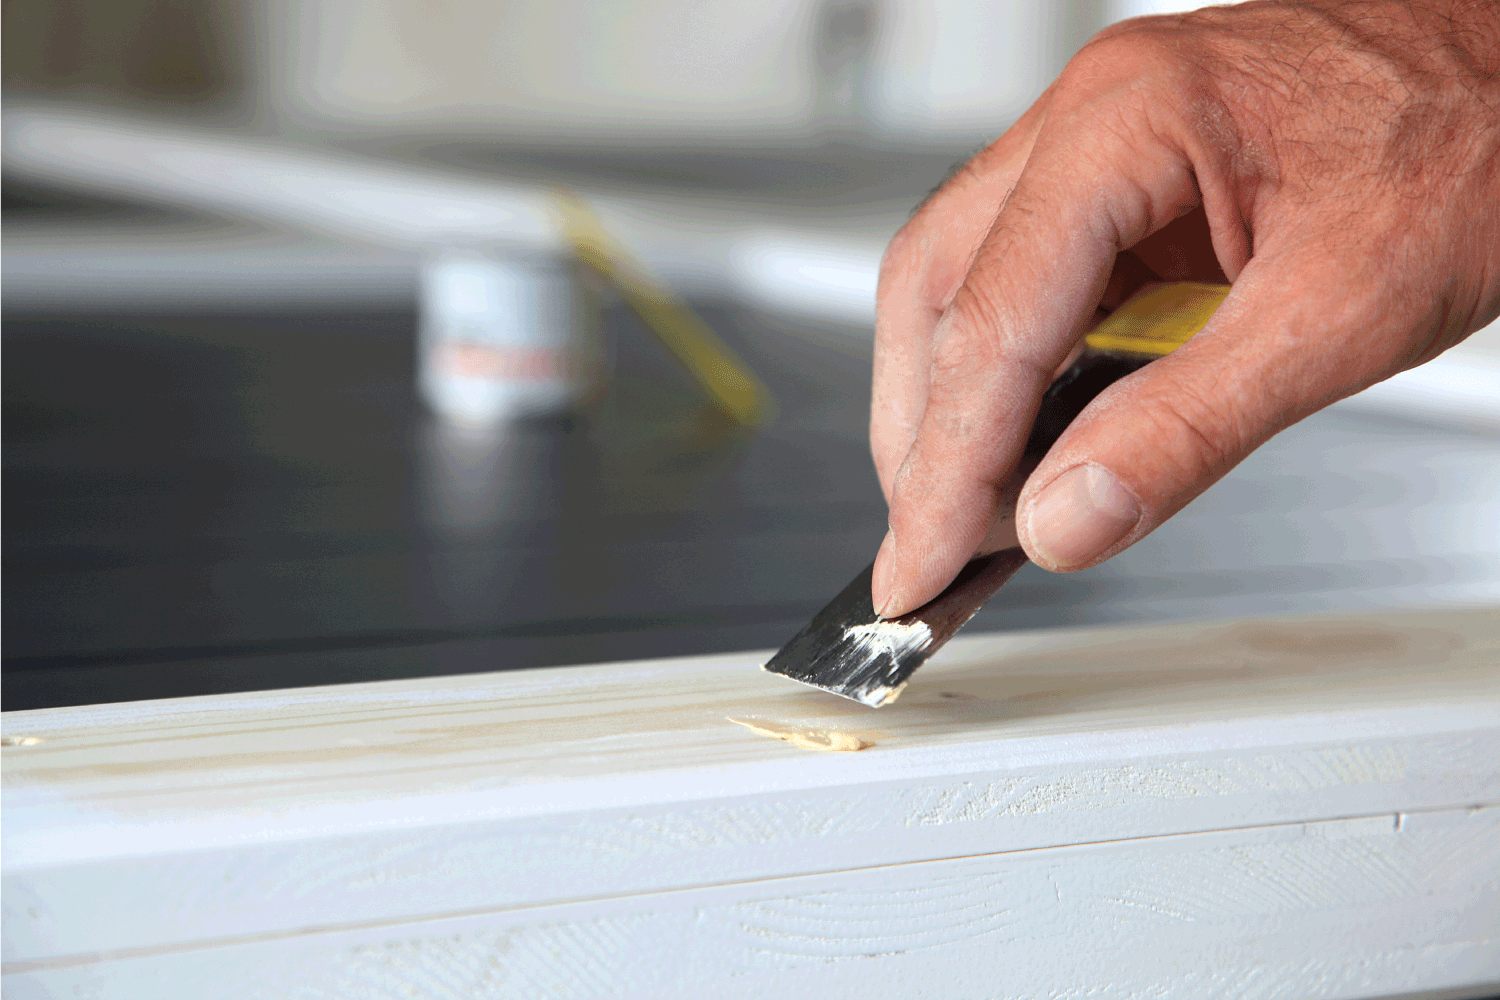 woodwork. Putty knife in man's hand. DIY worker applying filler to the wood. Removing holes from a wood surface